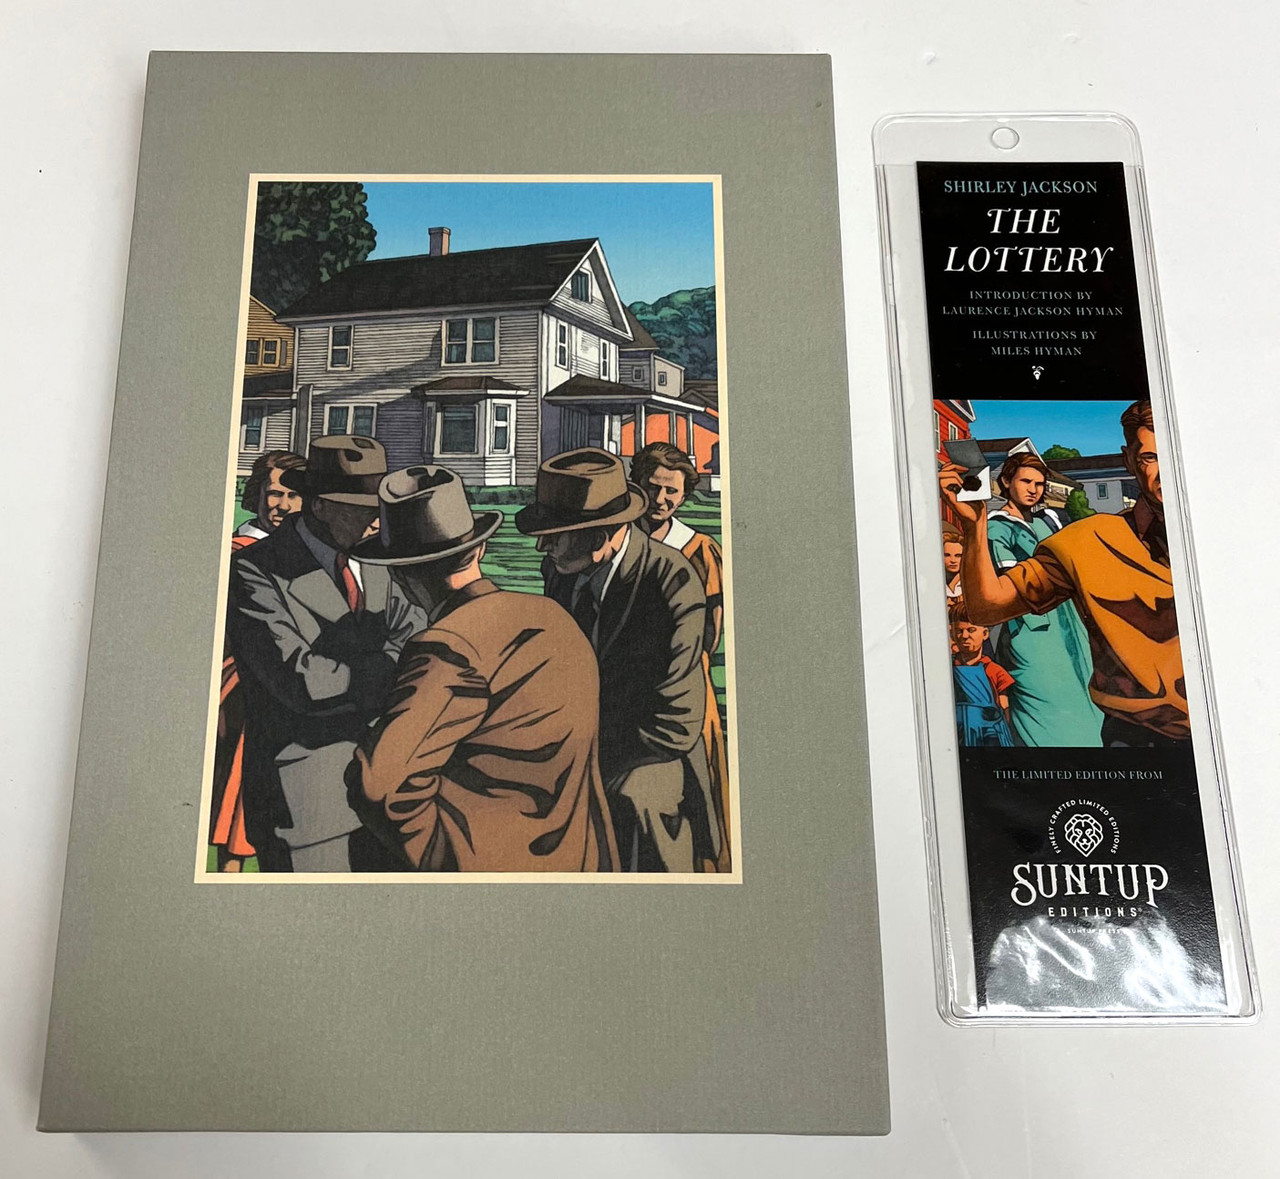 Shirley Jackson "The Haunting of Hill House" and "The Lottery" Signed Limited Edition No. 71 Matching Numbers Set [Very Fine]